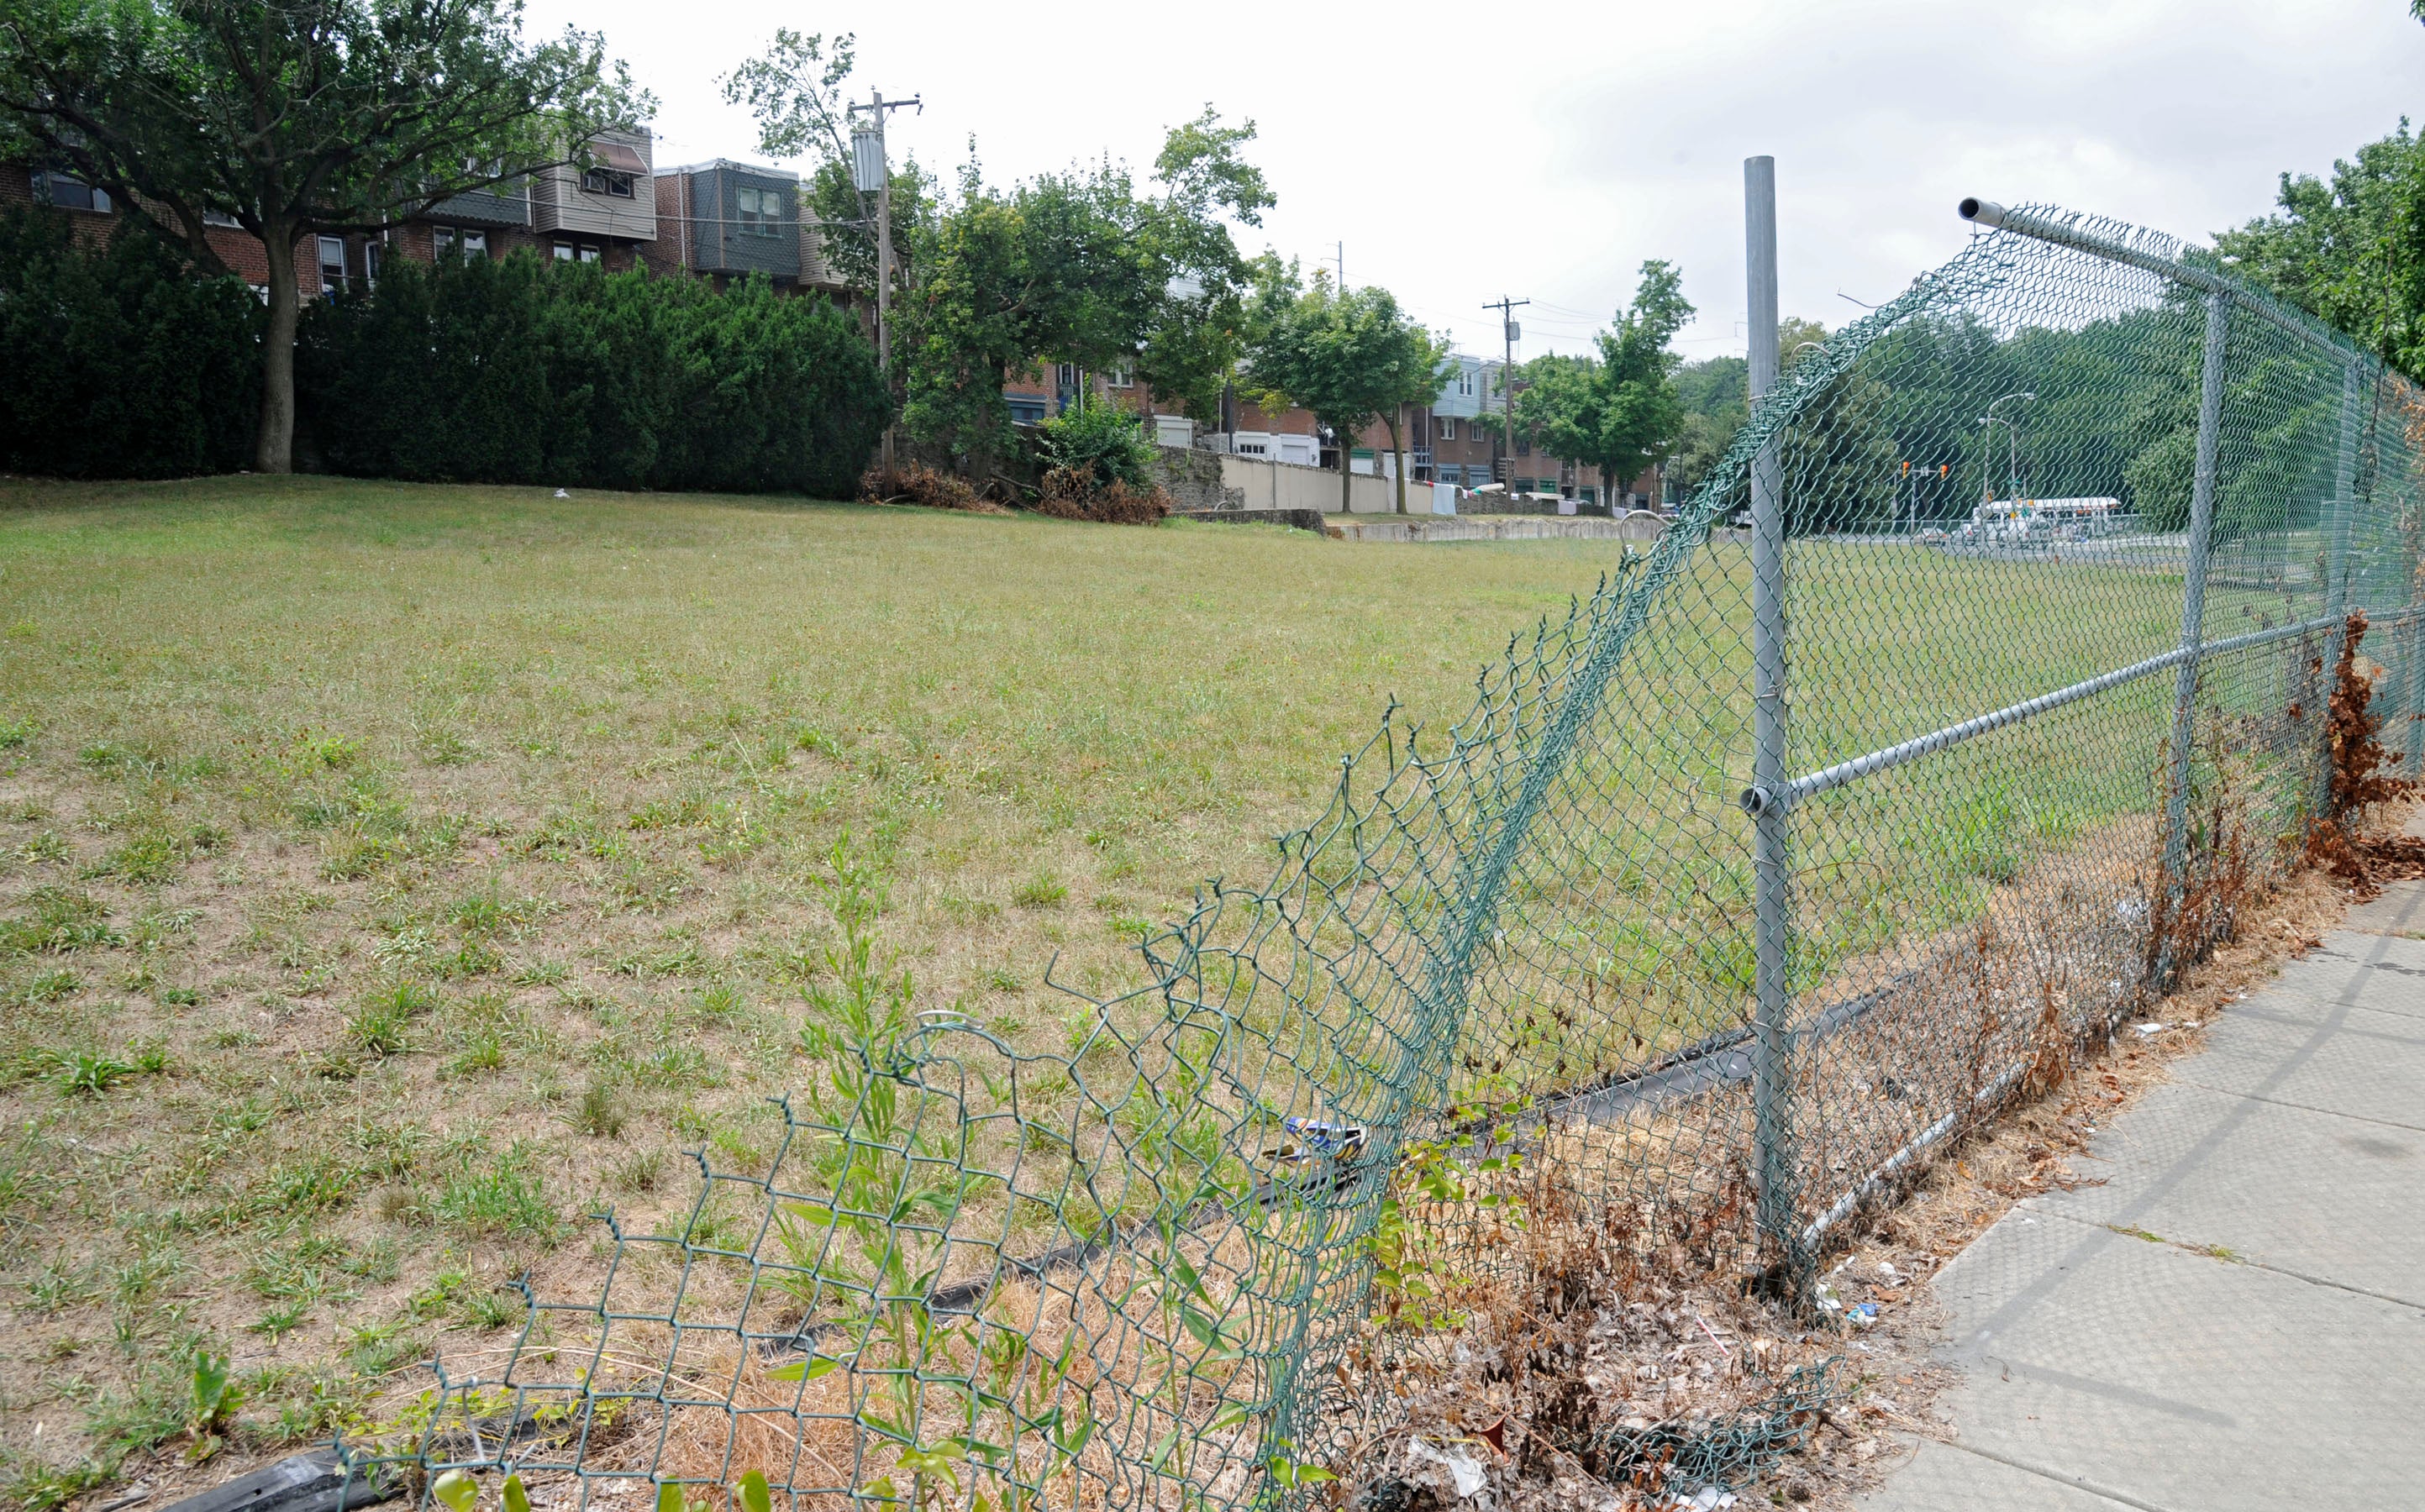 A large empty lot on Cobbs Creek Parkway owned by a bankrupt medical company owes $1.6 million. (Clem Murray / Inquirer)